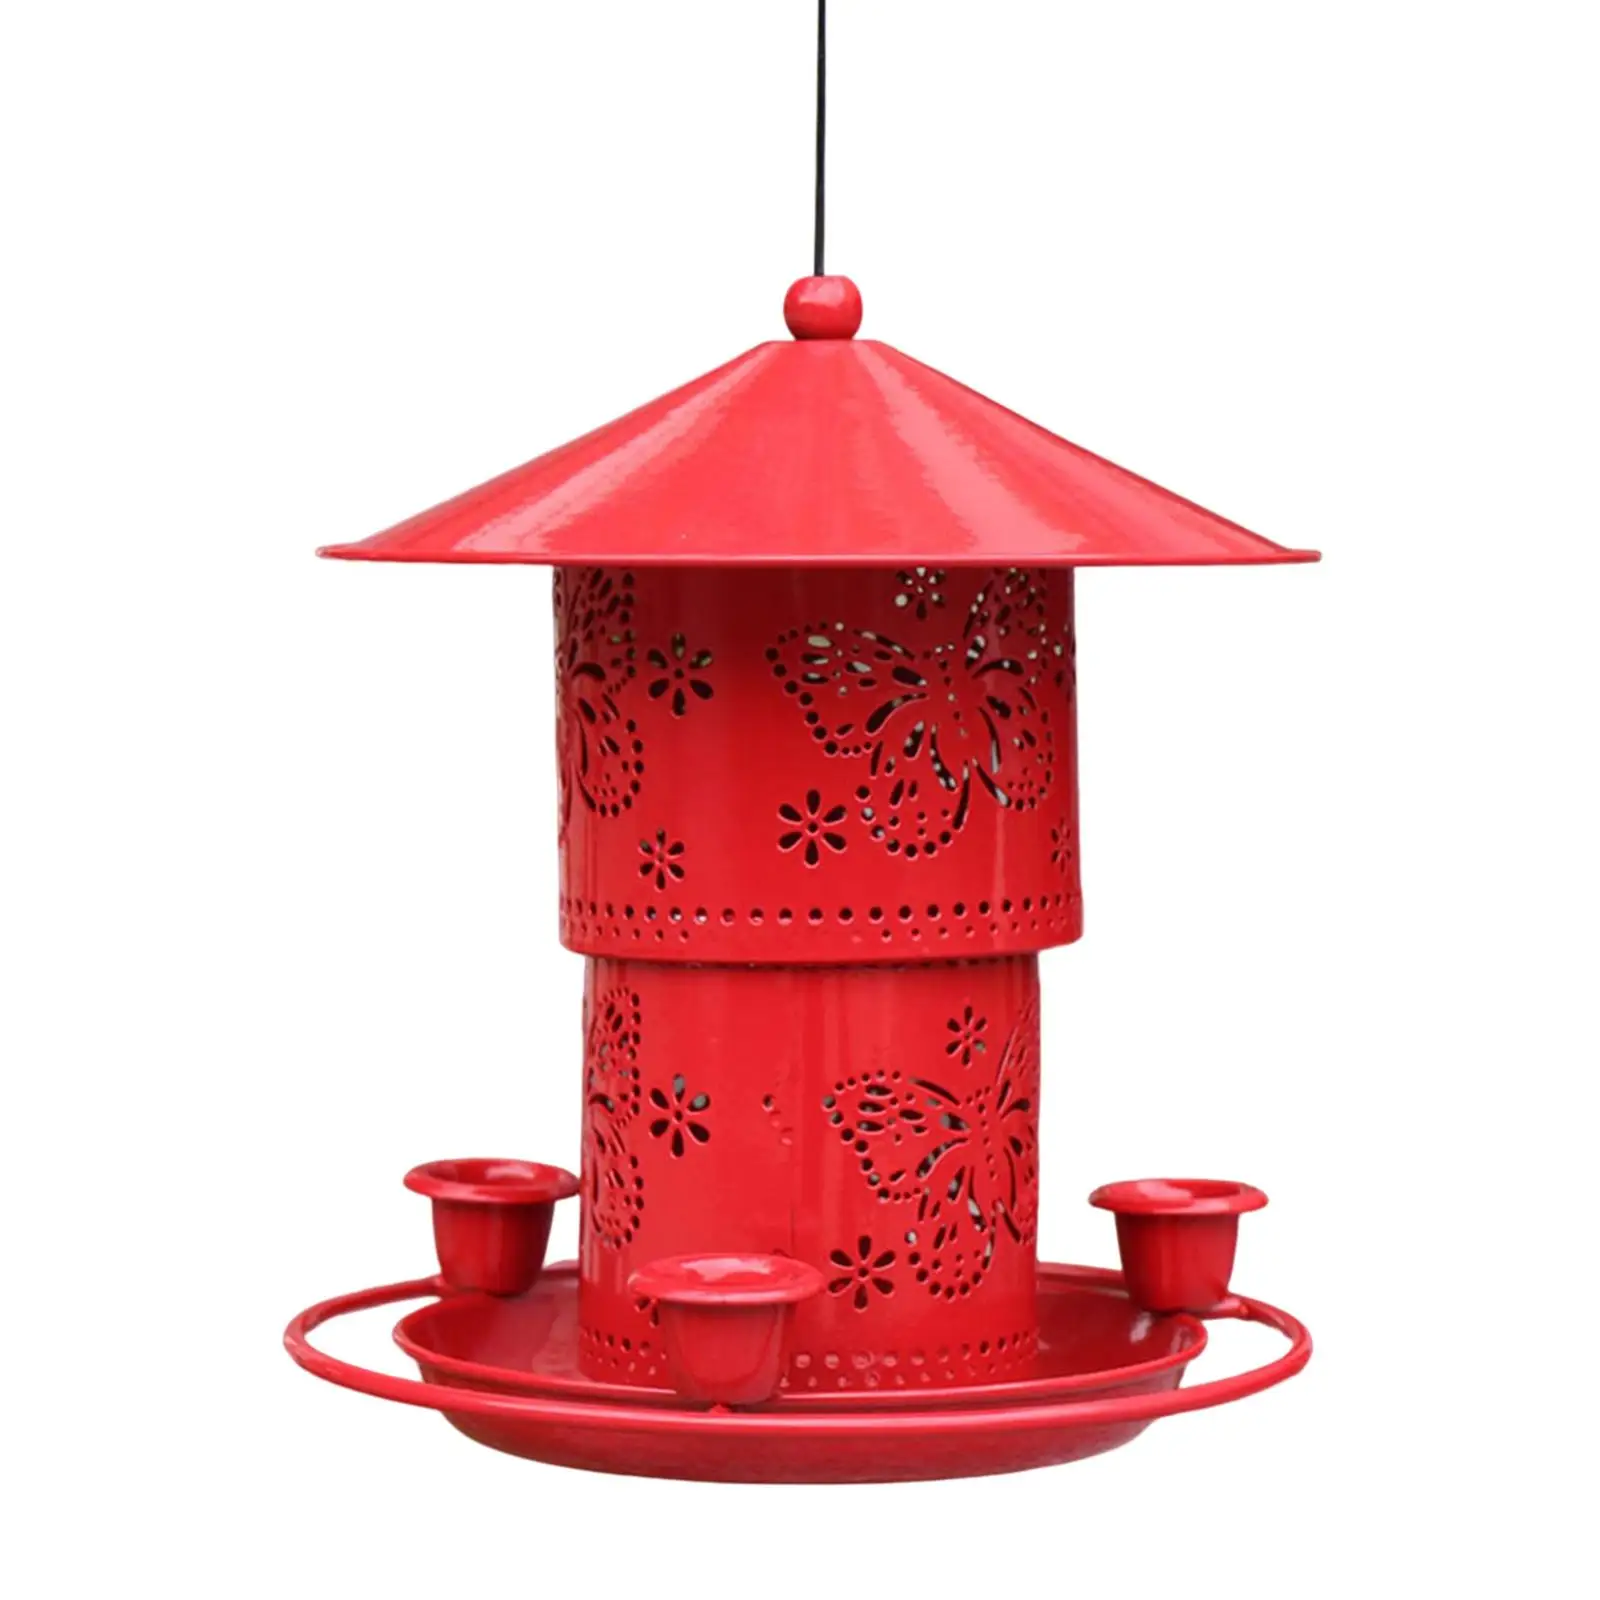 Hummingbird Feeder Easy to Clean 3 Feeder Ports for Trees Yard Small Birds